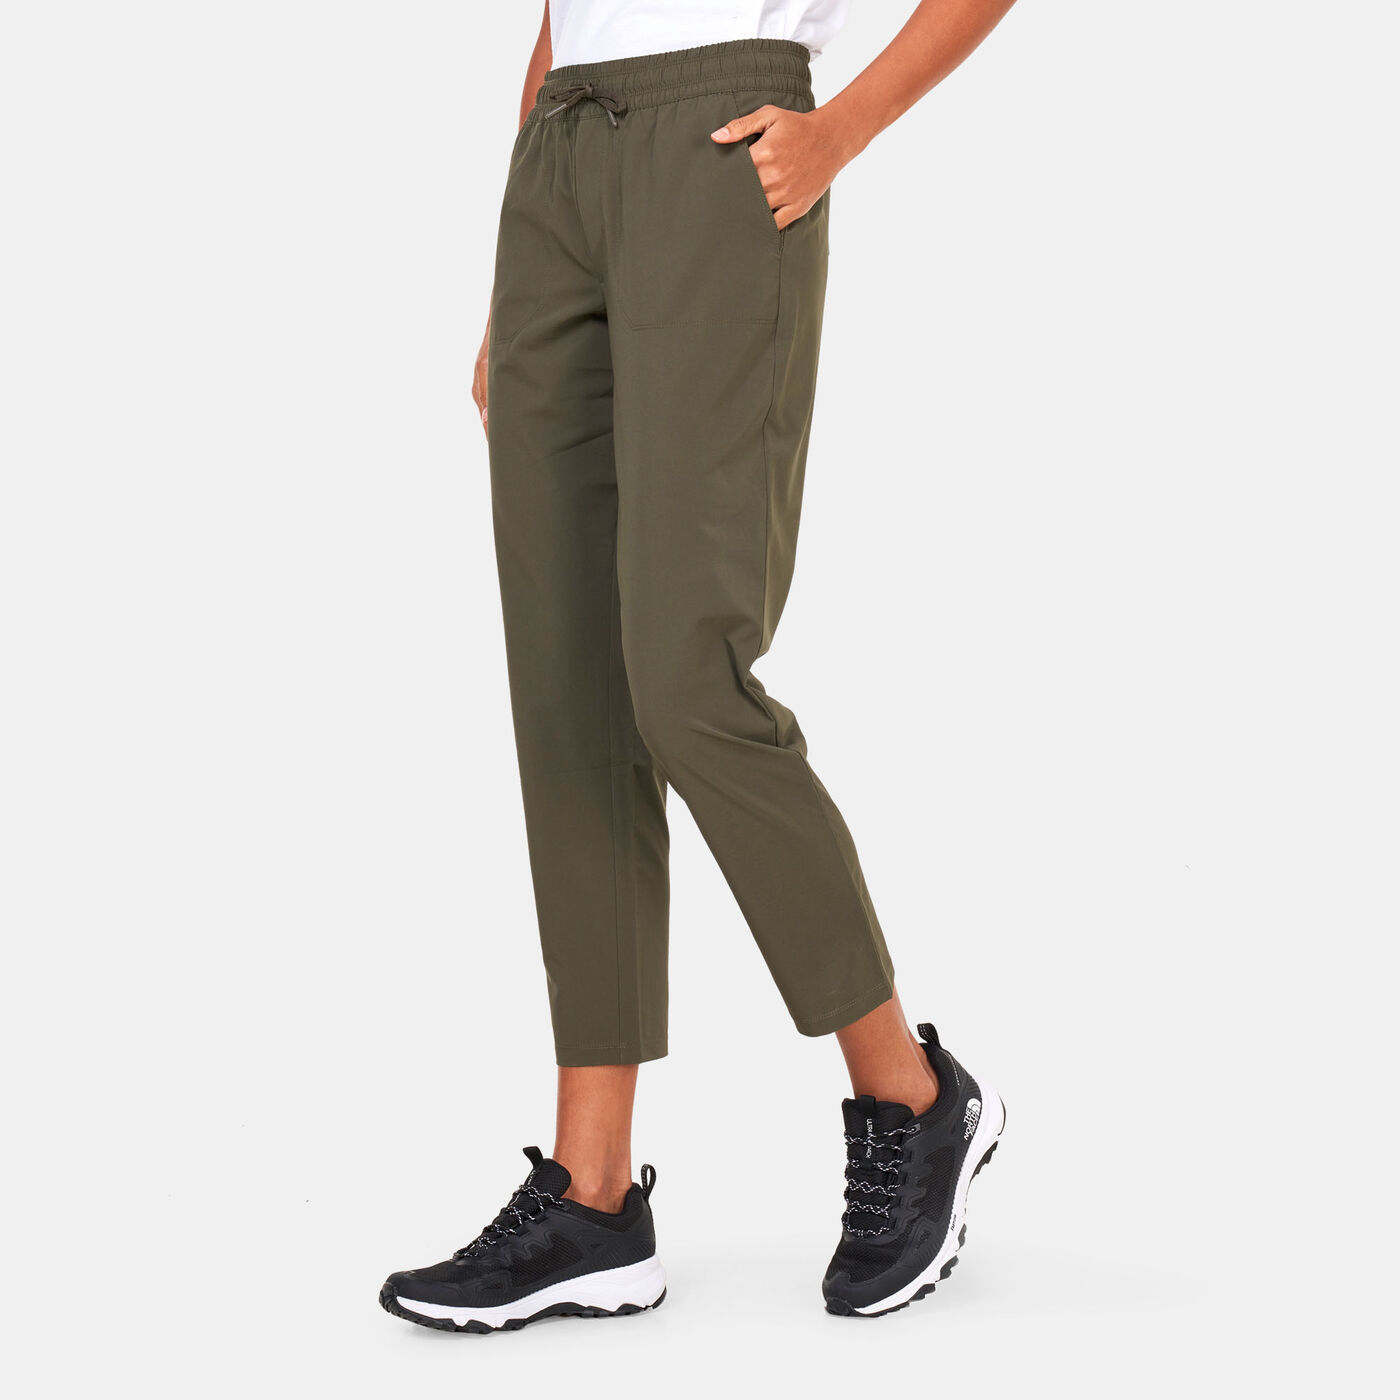 Women’s Never Stop Wearing Ankle Pants